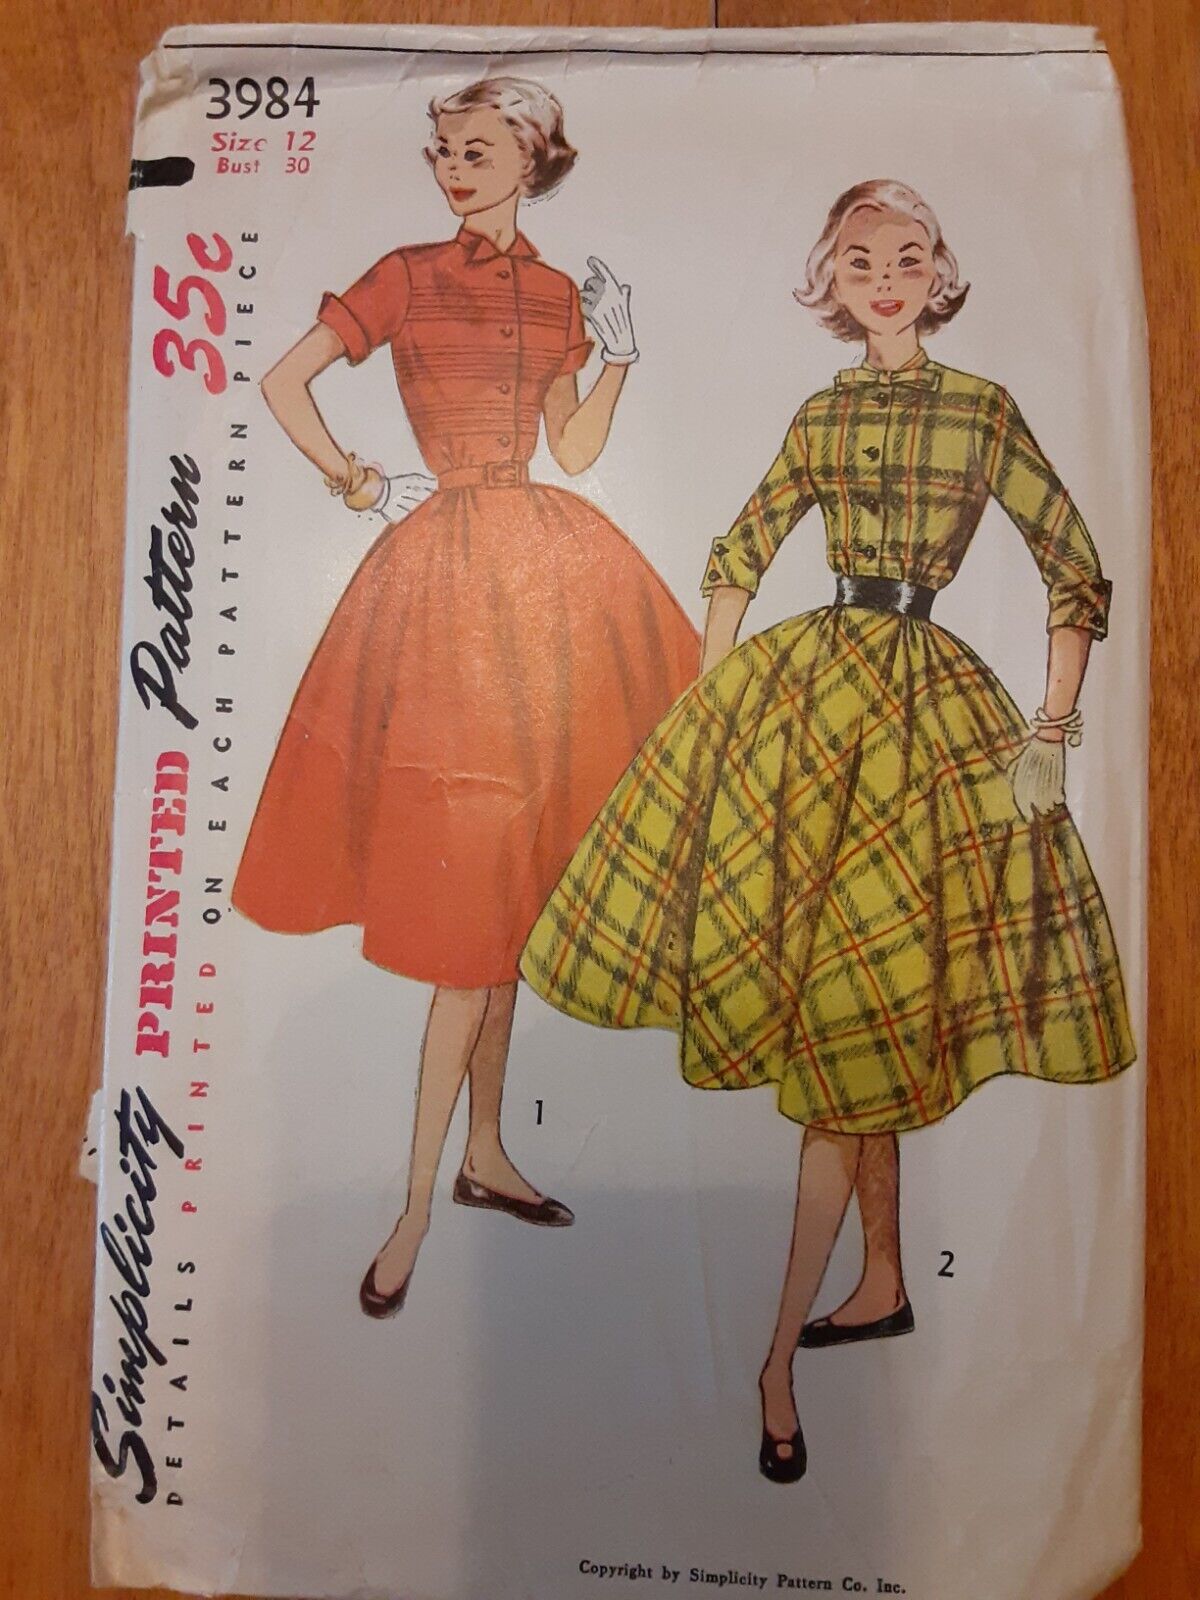 1952 Simplicity 3984 Miss Size 12 Bust 30 Teen Age Dress W/Front Button Closing,